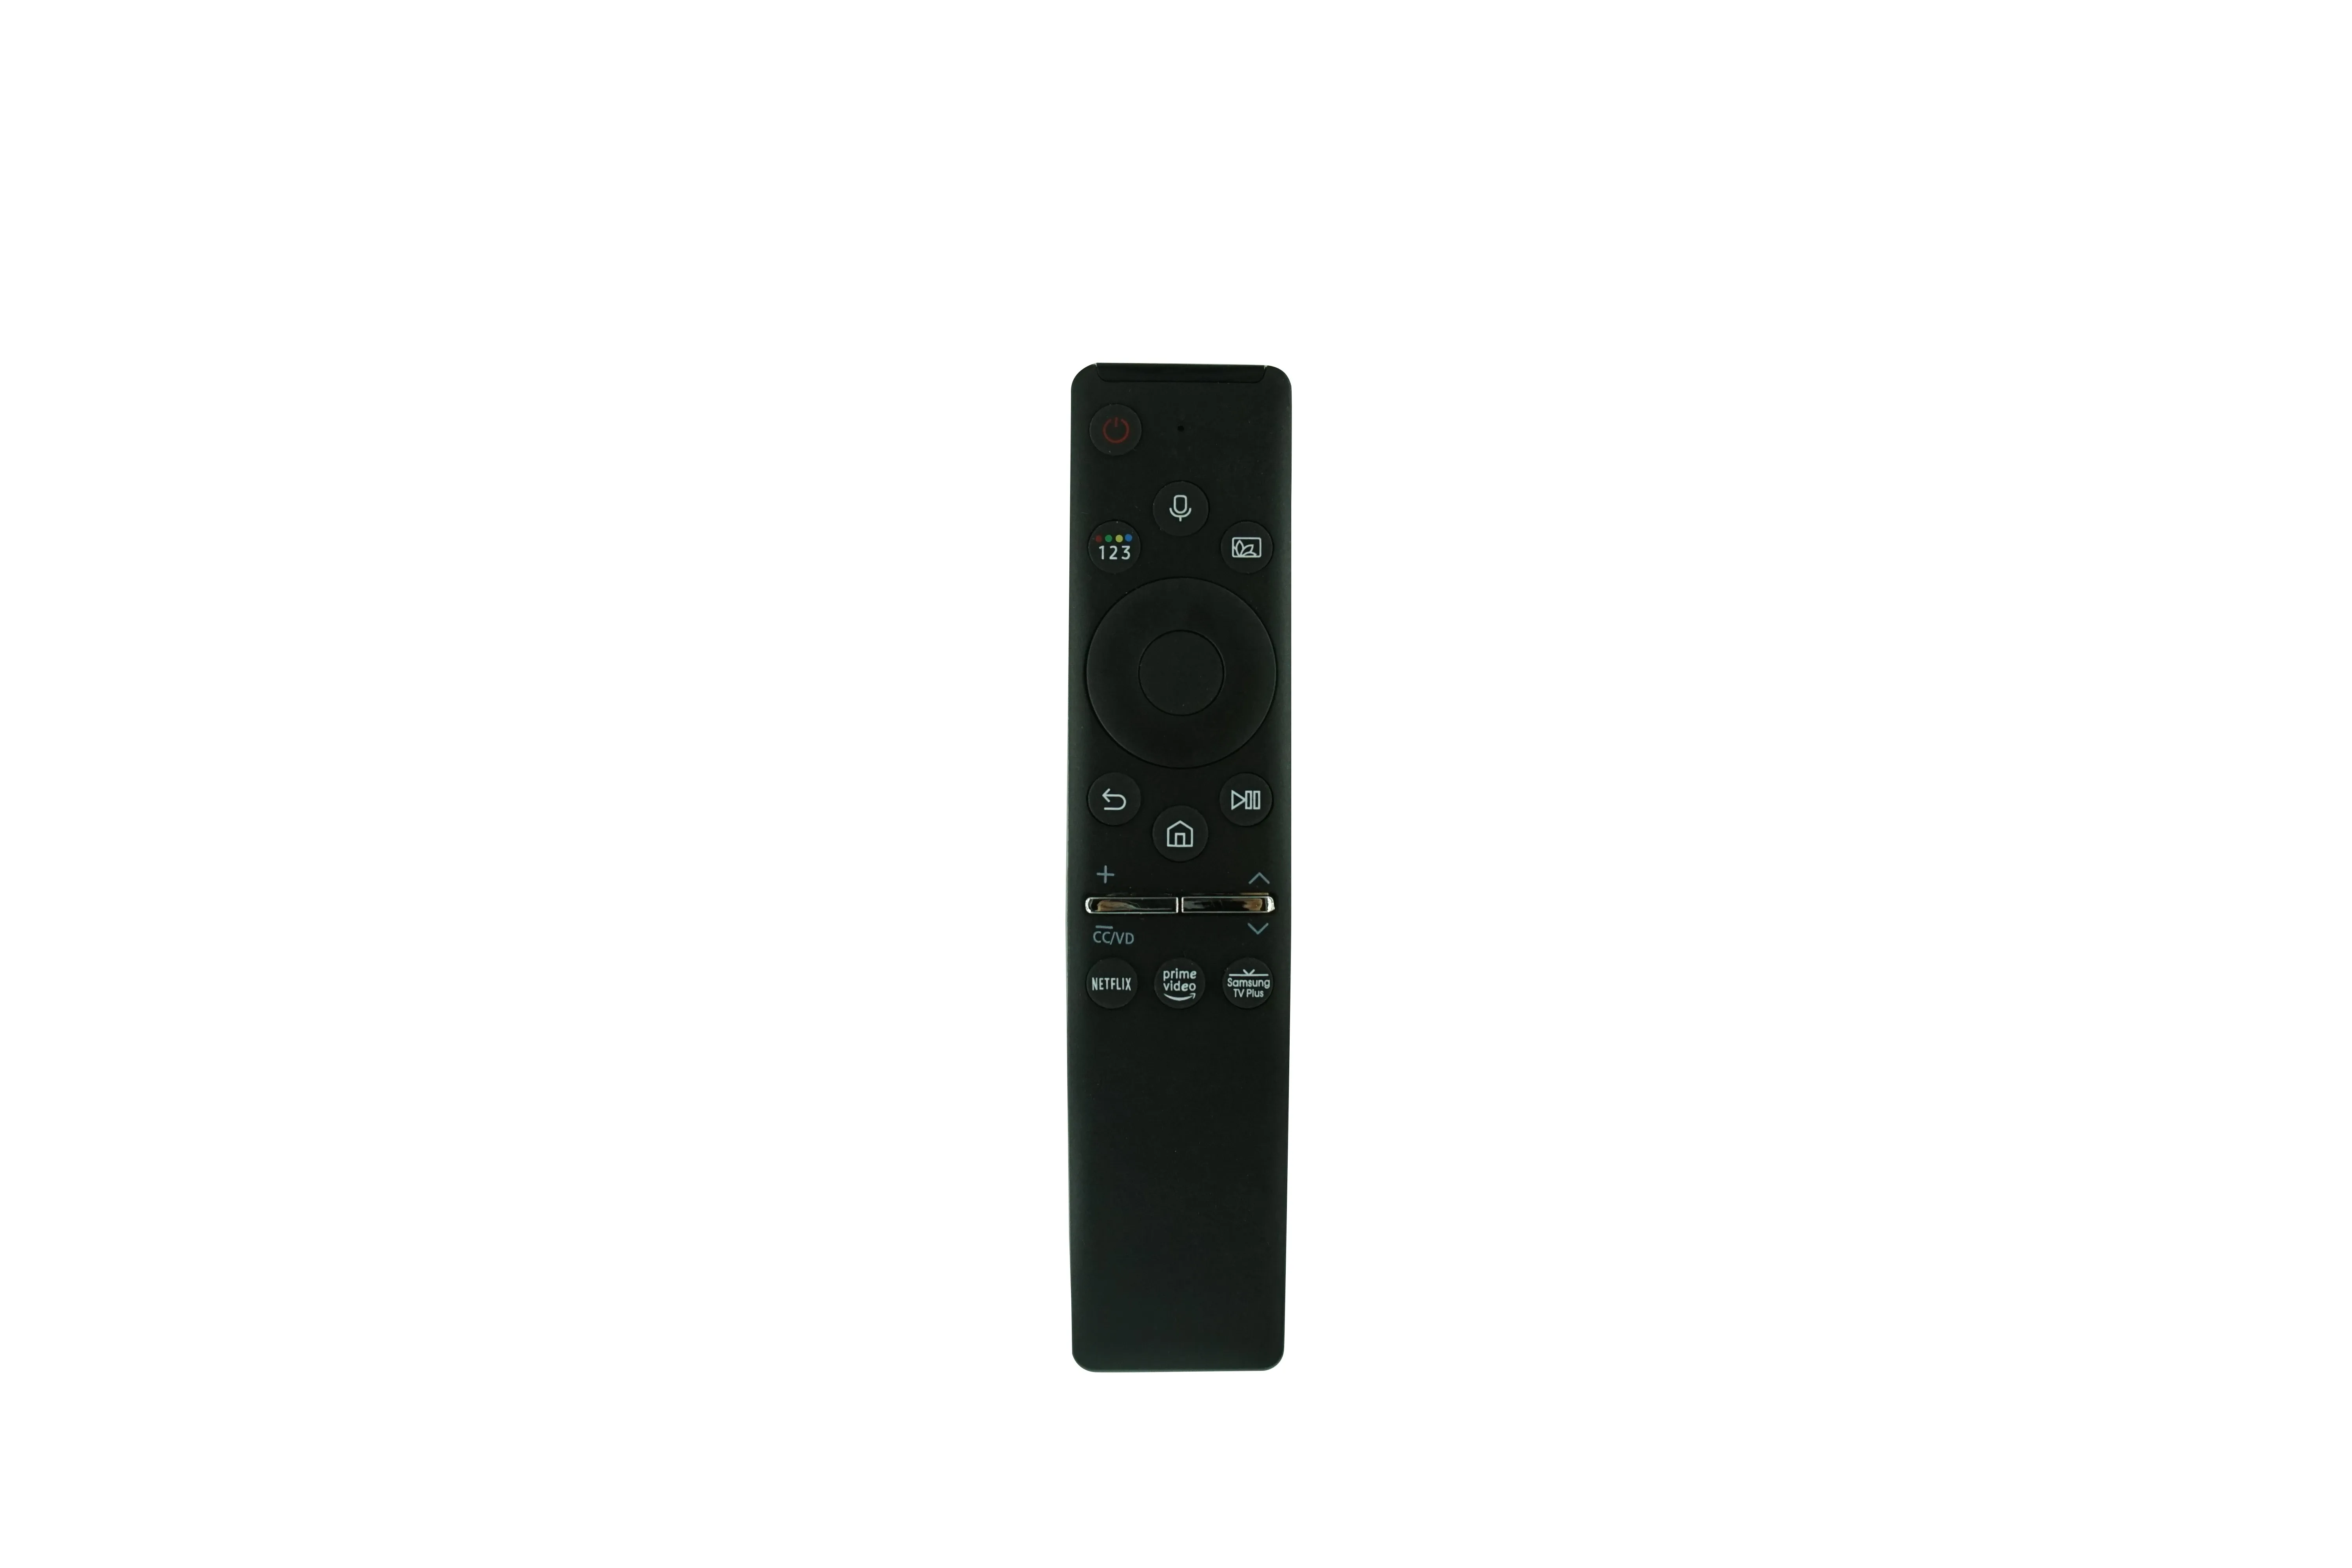 

Voice Bluetooth Remote Control For Samsung QA32LS03TBWXXY QA43LS03TAWXXY QA50LS03TAWXXY QA55LS03TAWXXY QA65LS03TAWXXY LCD LED TV